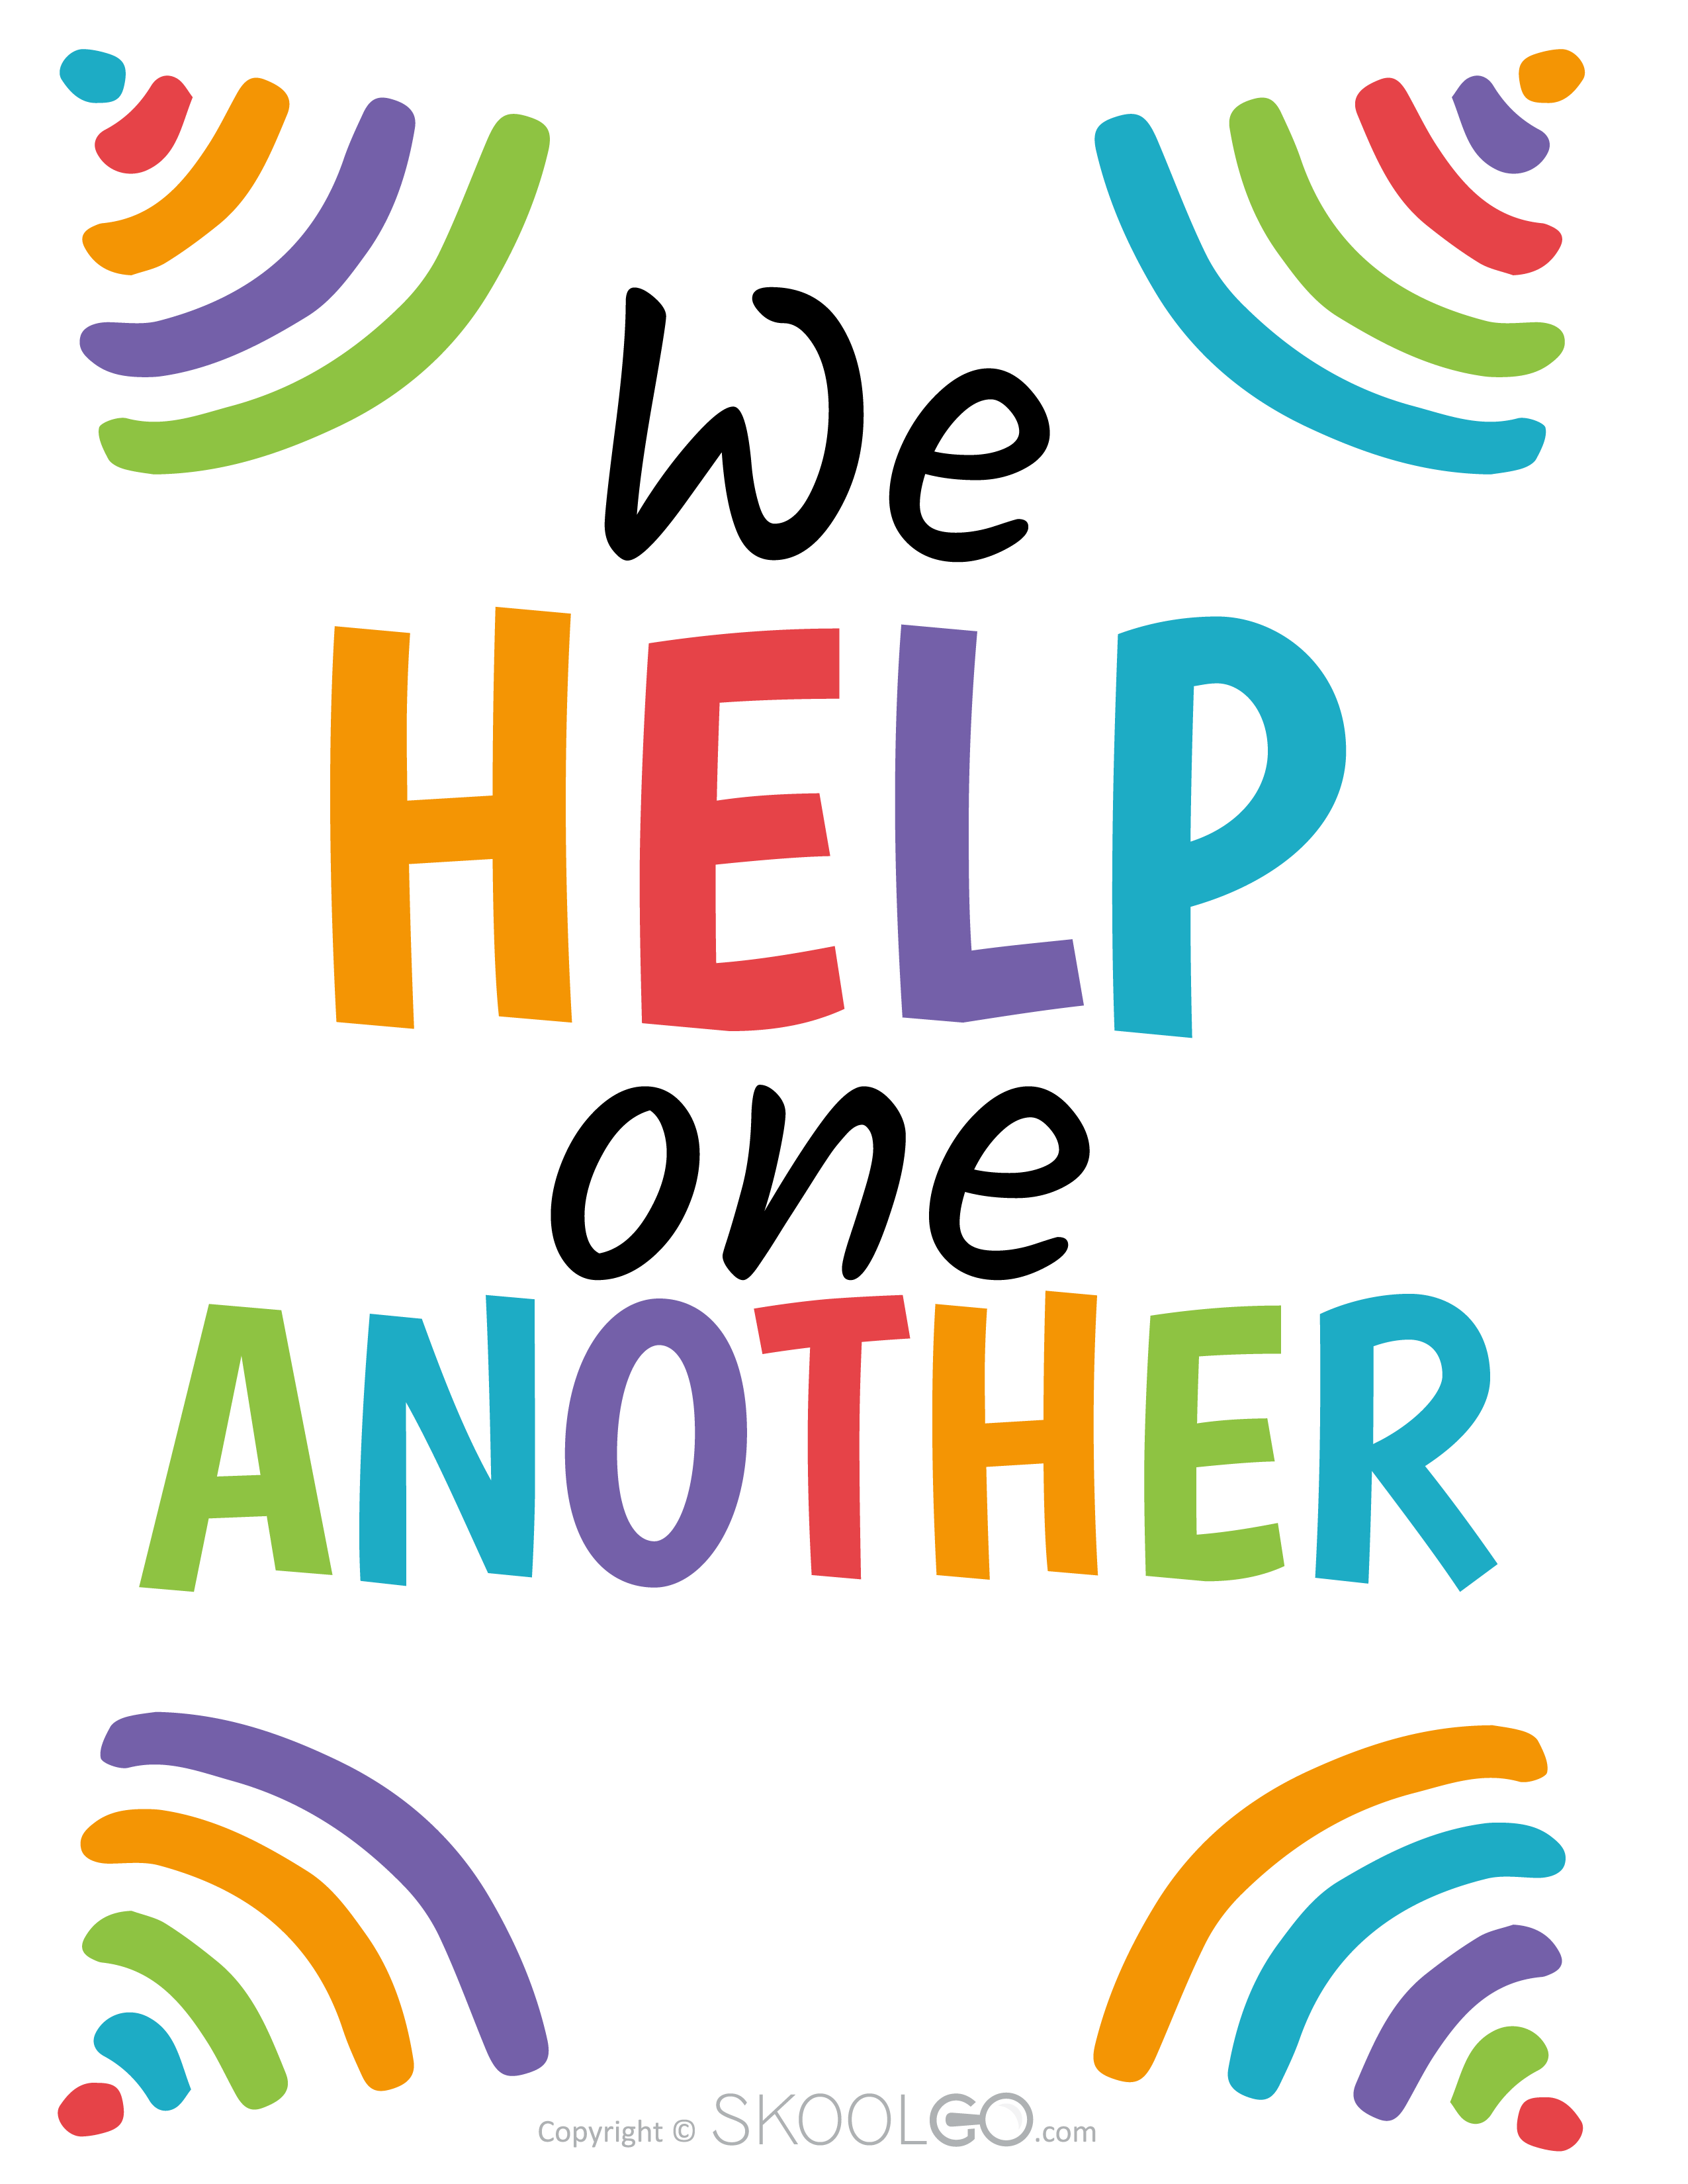 We Help One Another - Free Poster